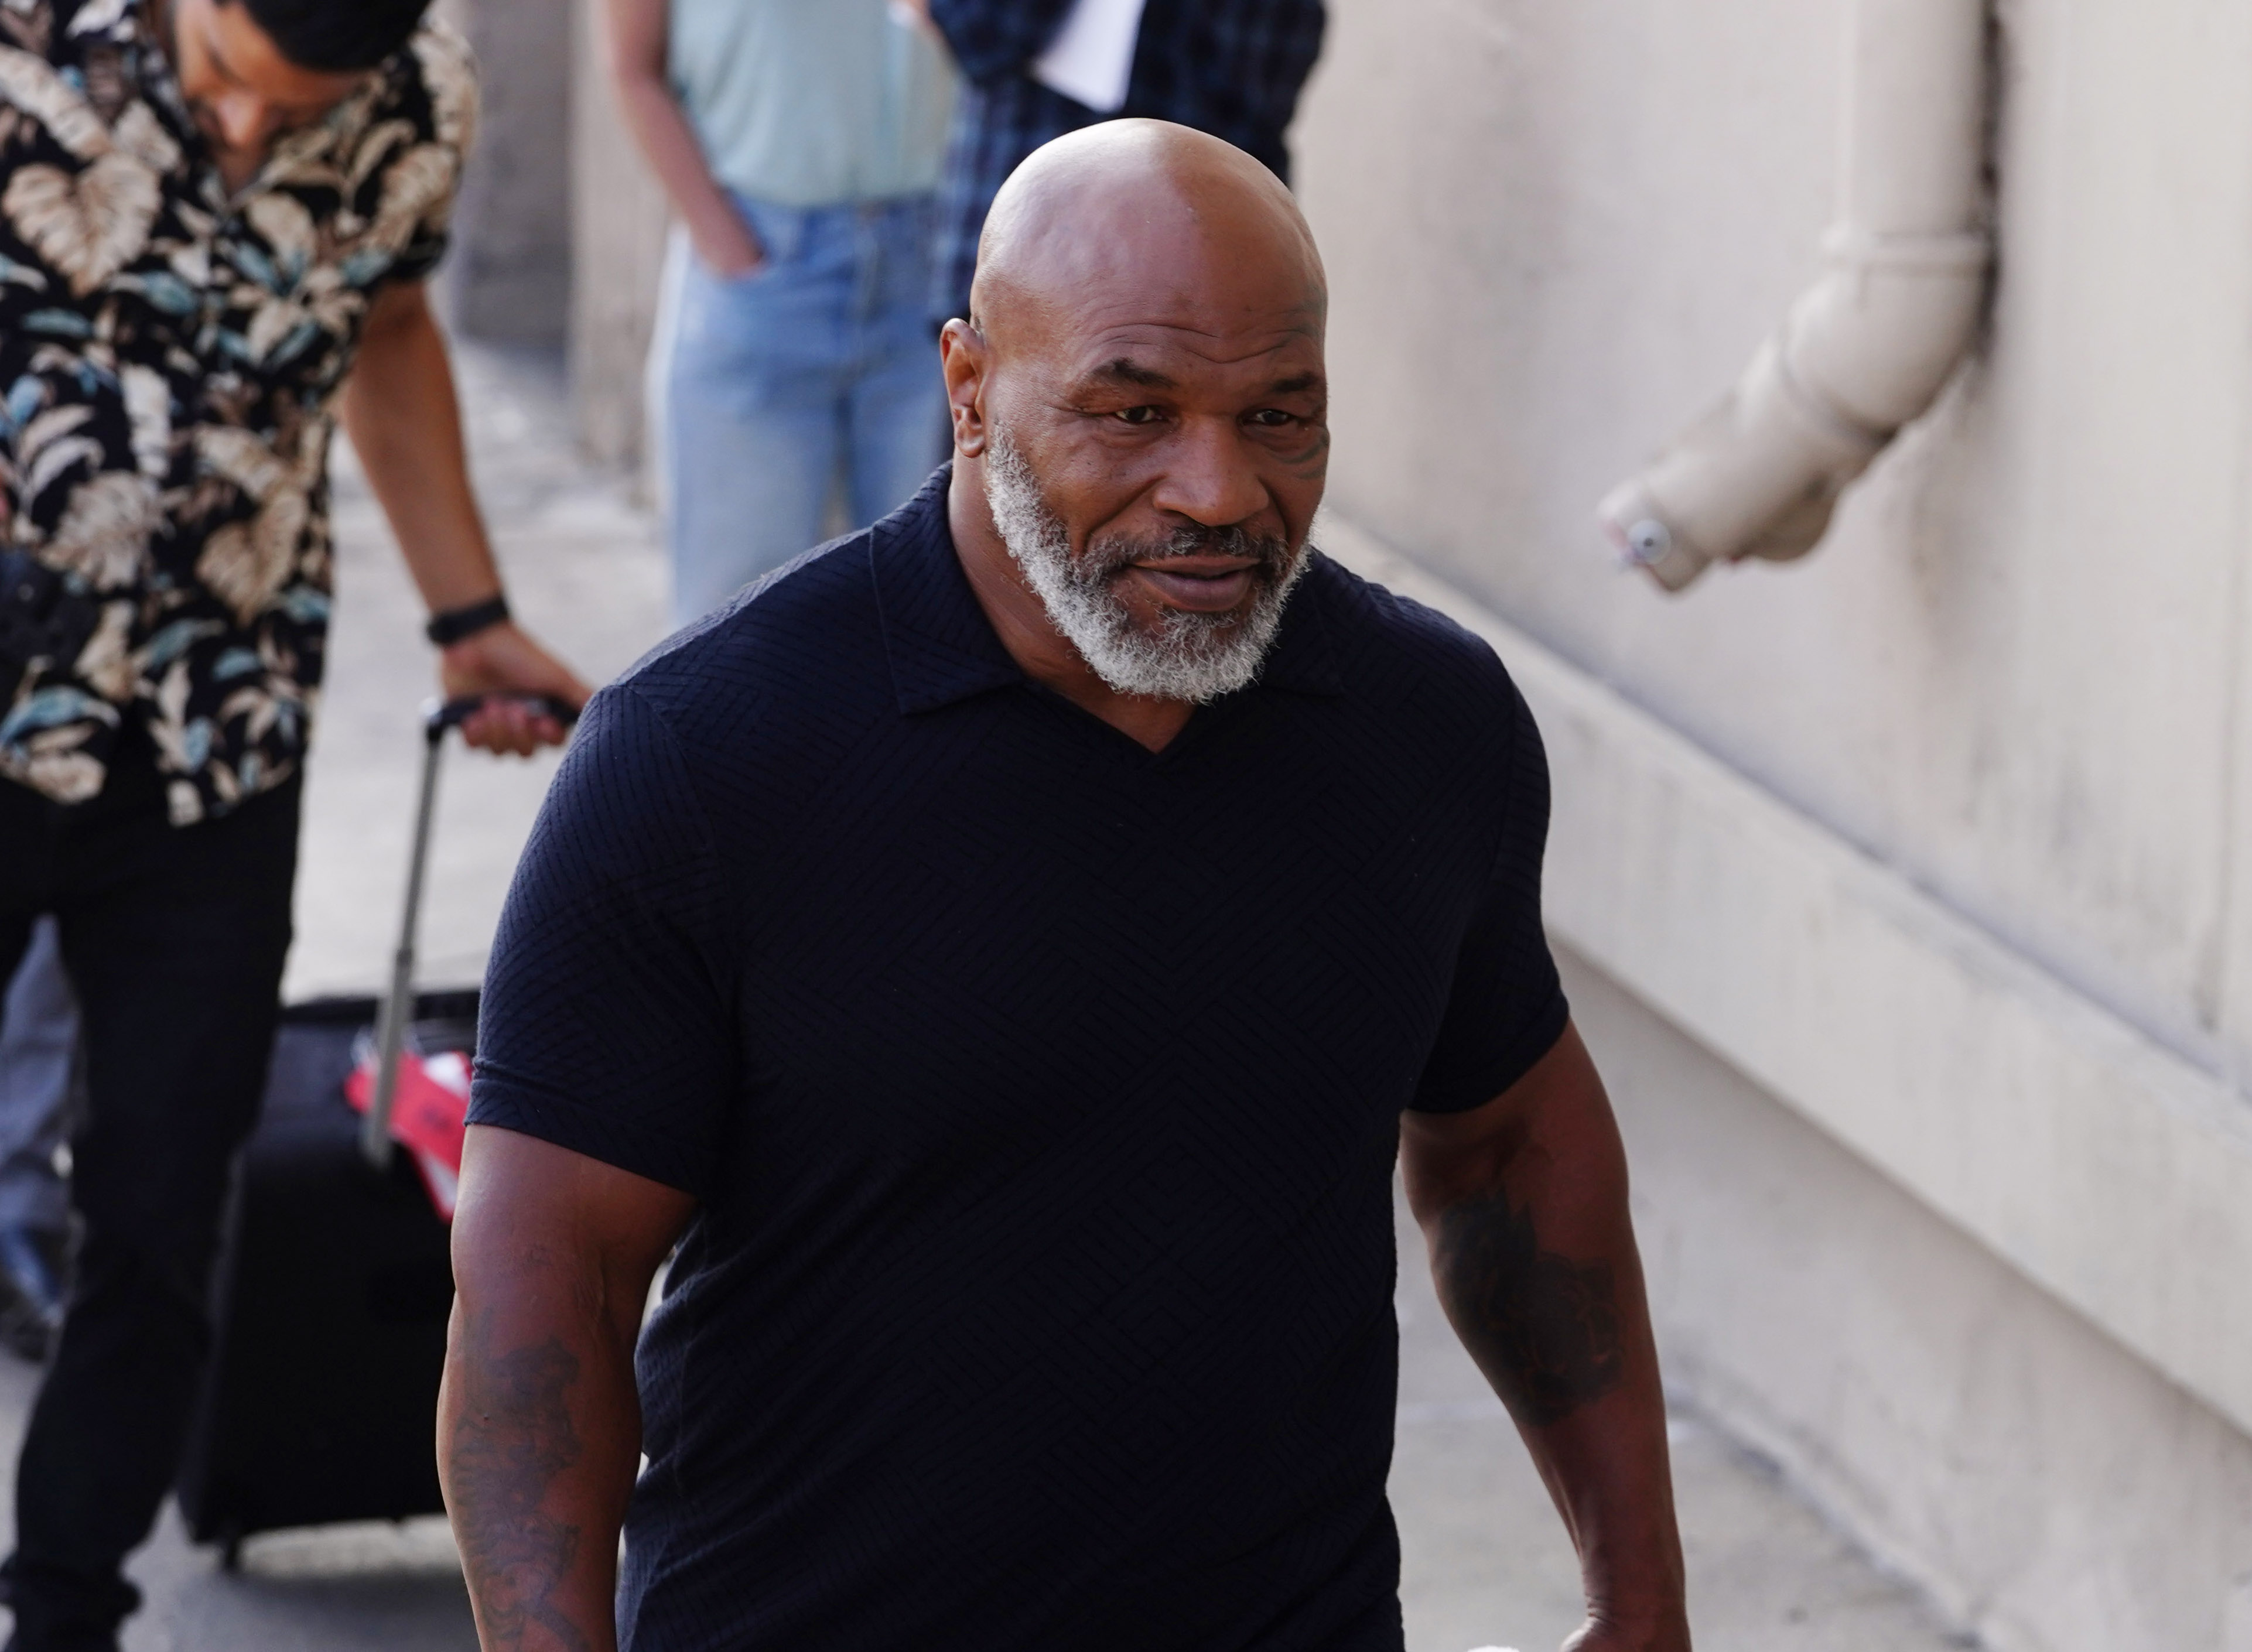 Mike Tyson Reflects on Shocking Loss to Buster Douglas: ‘He Made Me Human’